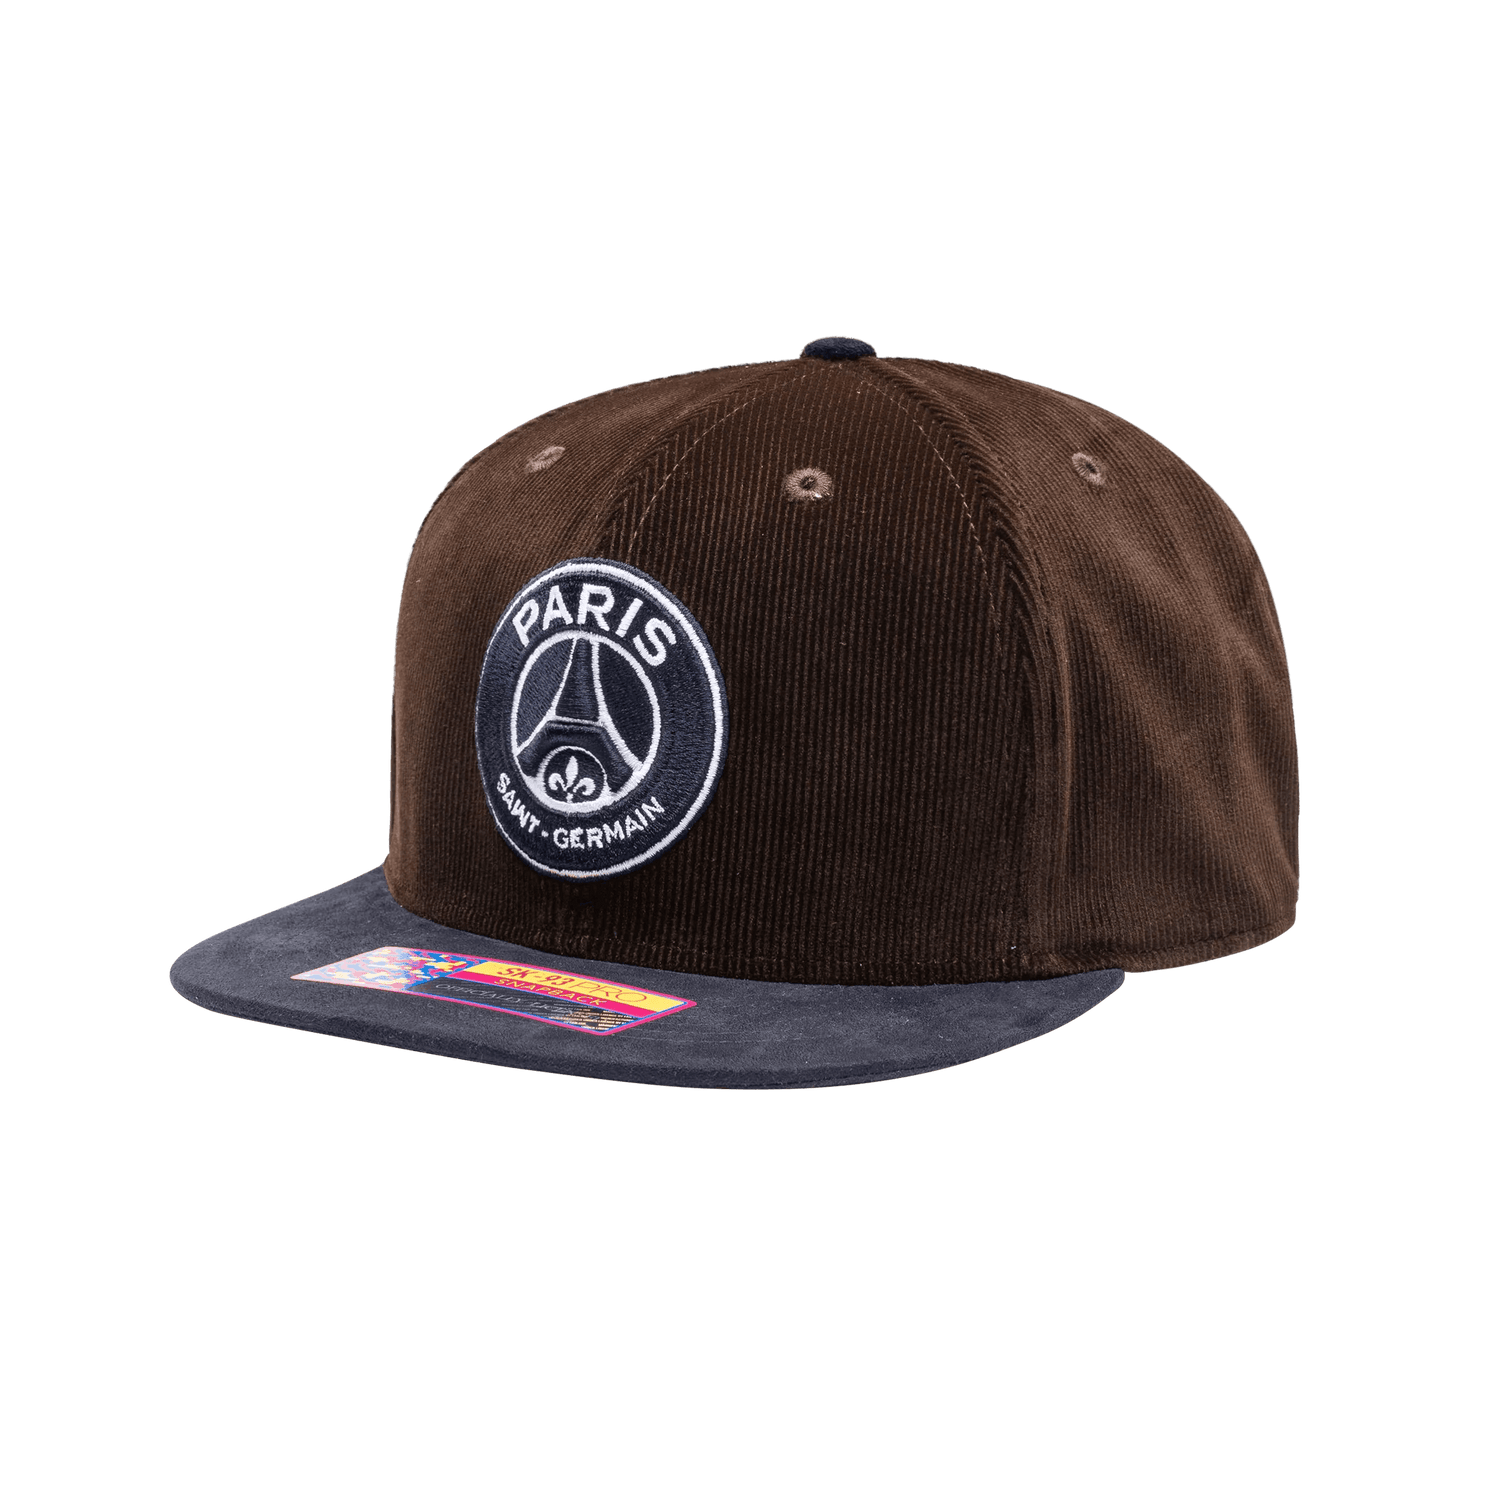 FI Collection Club PSG Cognac Snapback Hat (Lateral - Side 1)